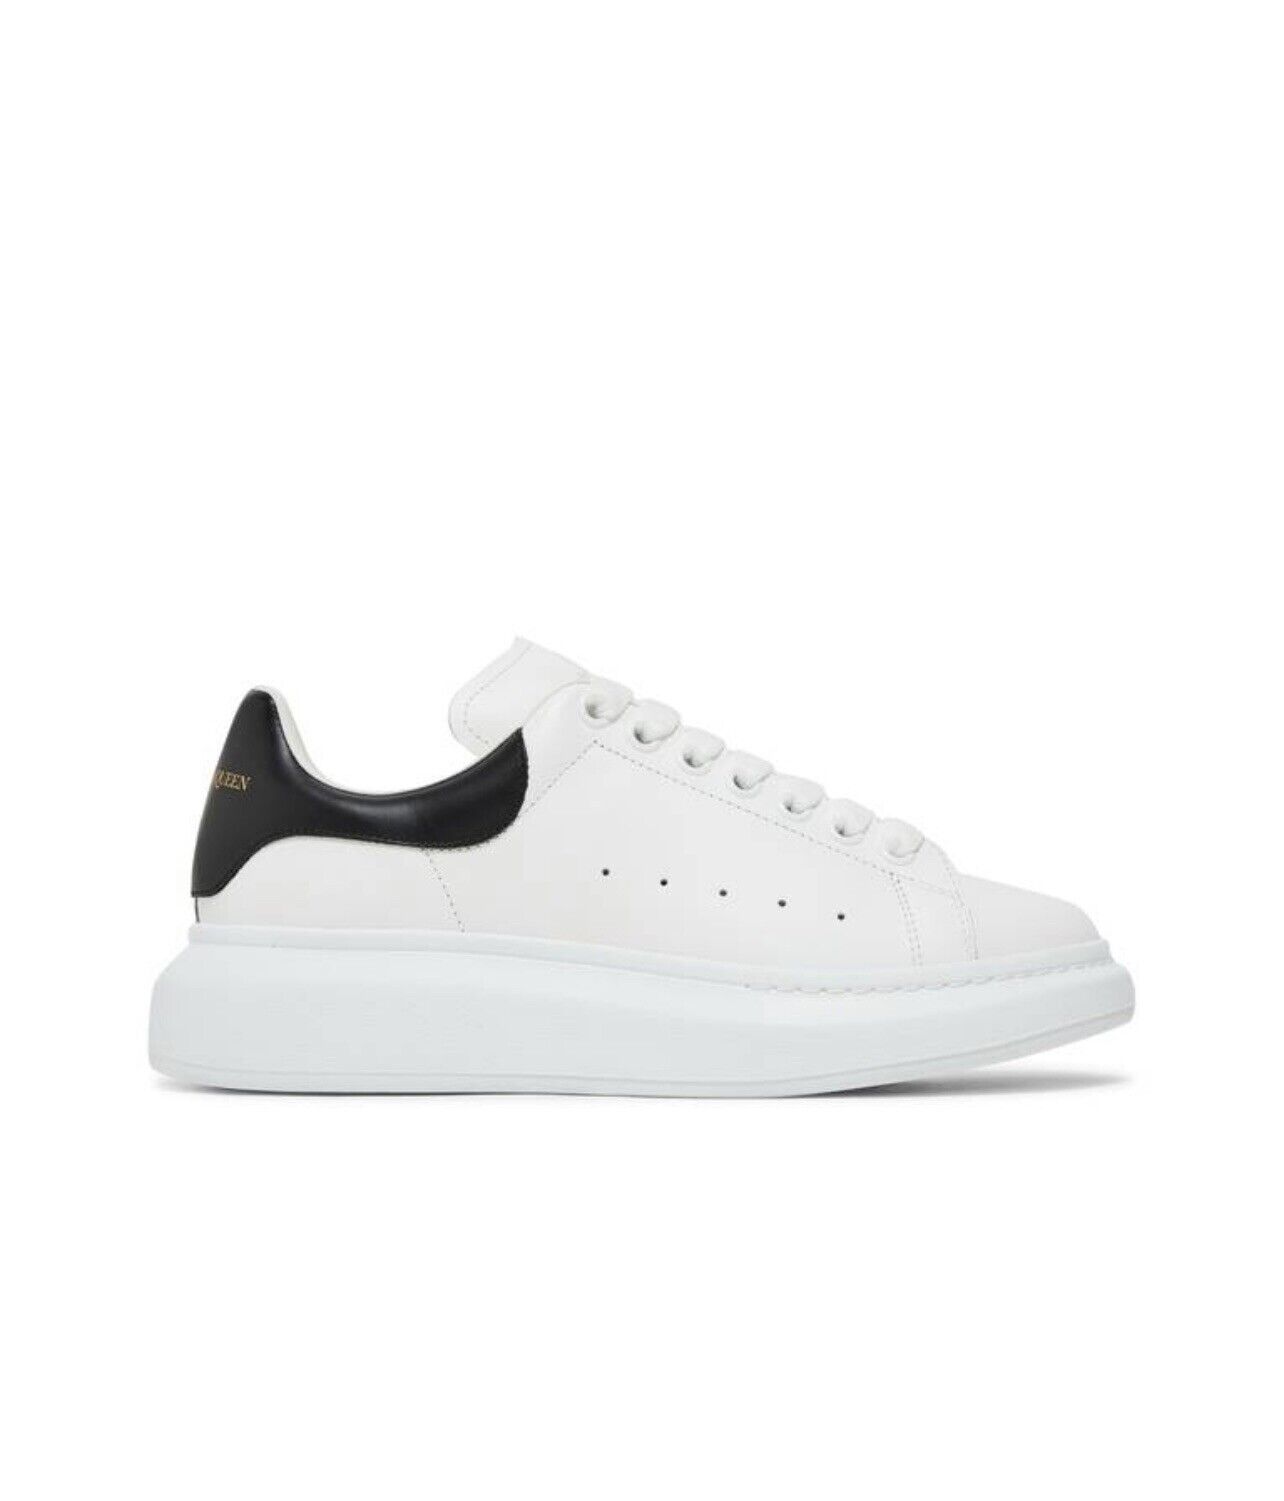 Alexander McQueen Men\'s Oversized Leather Sneakers Lily white Size US9-12